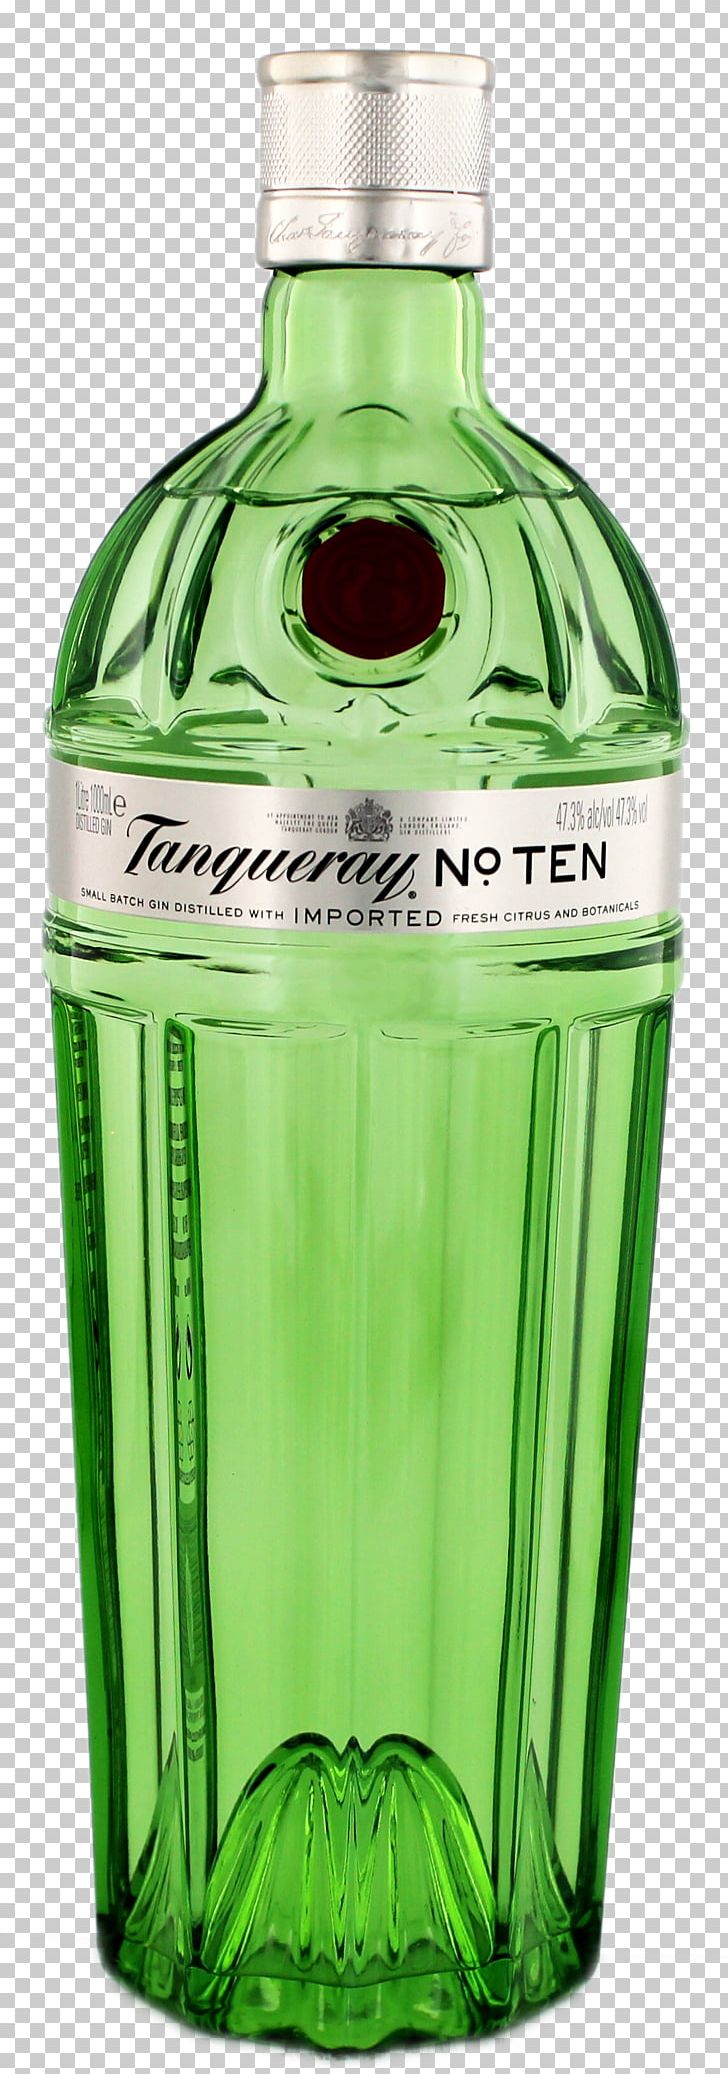 Tanqueray Gin Distilled Beverage Wine Martini PNG, Clipart, Alcohol By Volume, Alcoholic Beverage, Alcoholic Drink, Bottle, Cocktail Free PNG Download